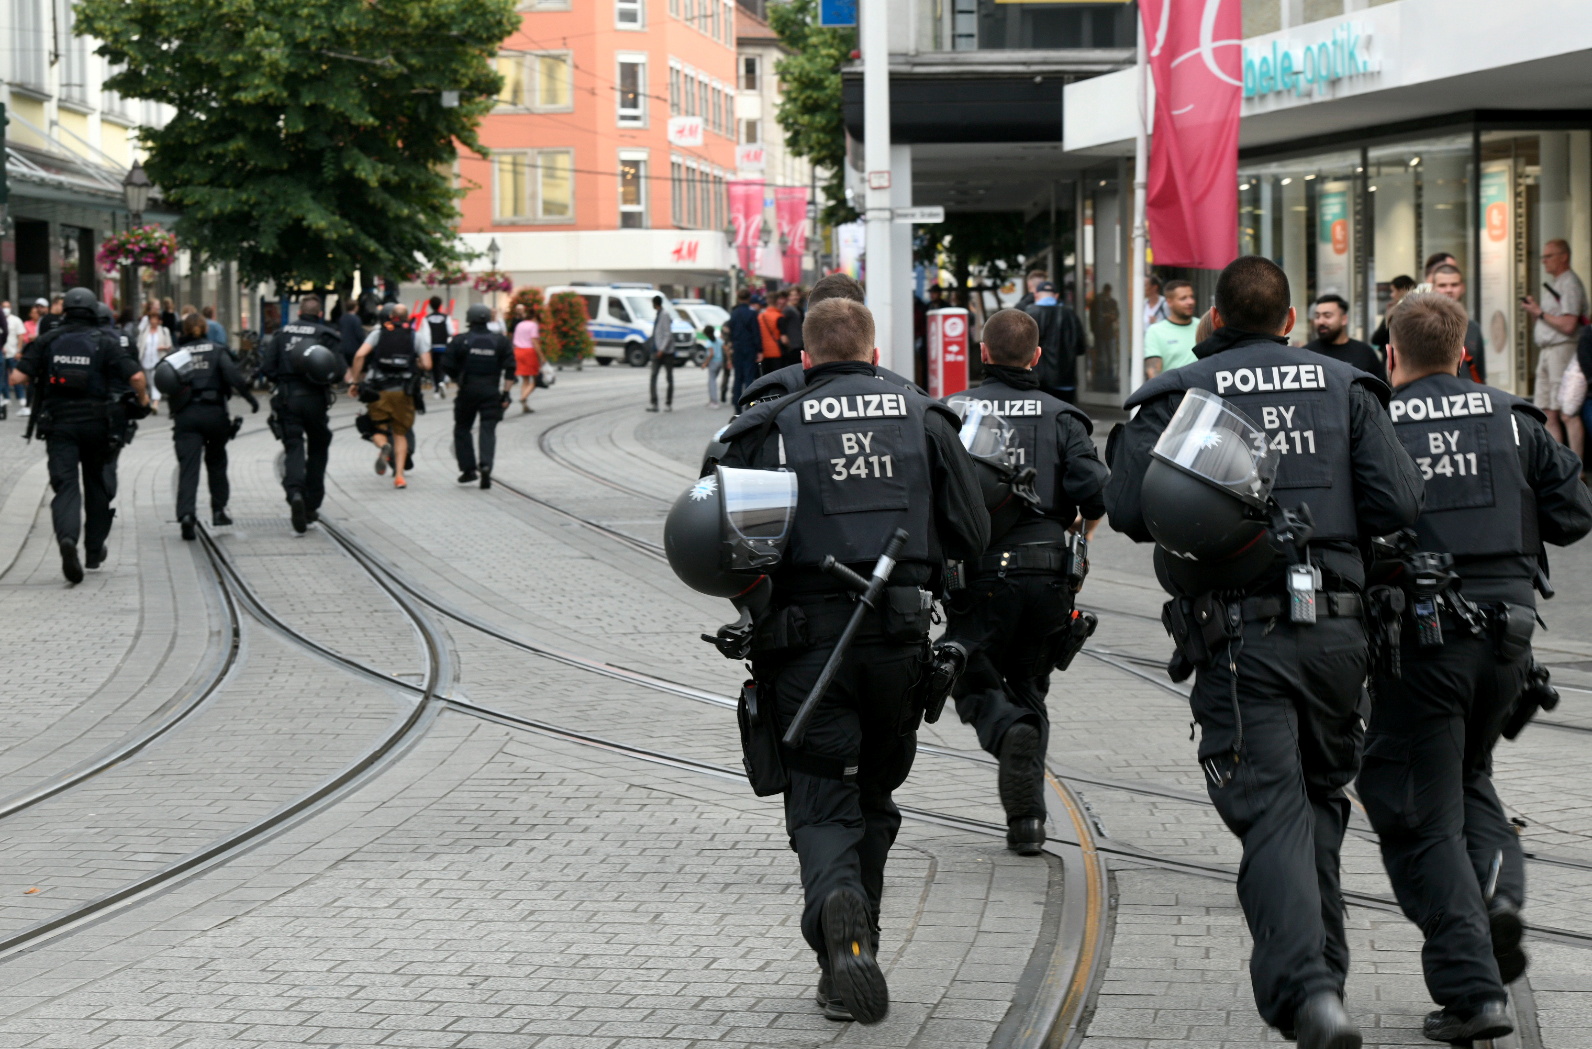 Officials gather at Barbarossaplatz in the German town of Wuerzburg, Germany, June 25, 2021, during a "major operation" in which police arrested a suspect after local media had earlier reported multiple stabbings.      REUTERS/Thomas Obermeier/Main-Post  